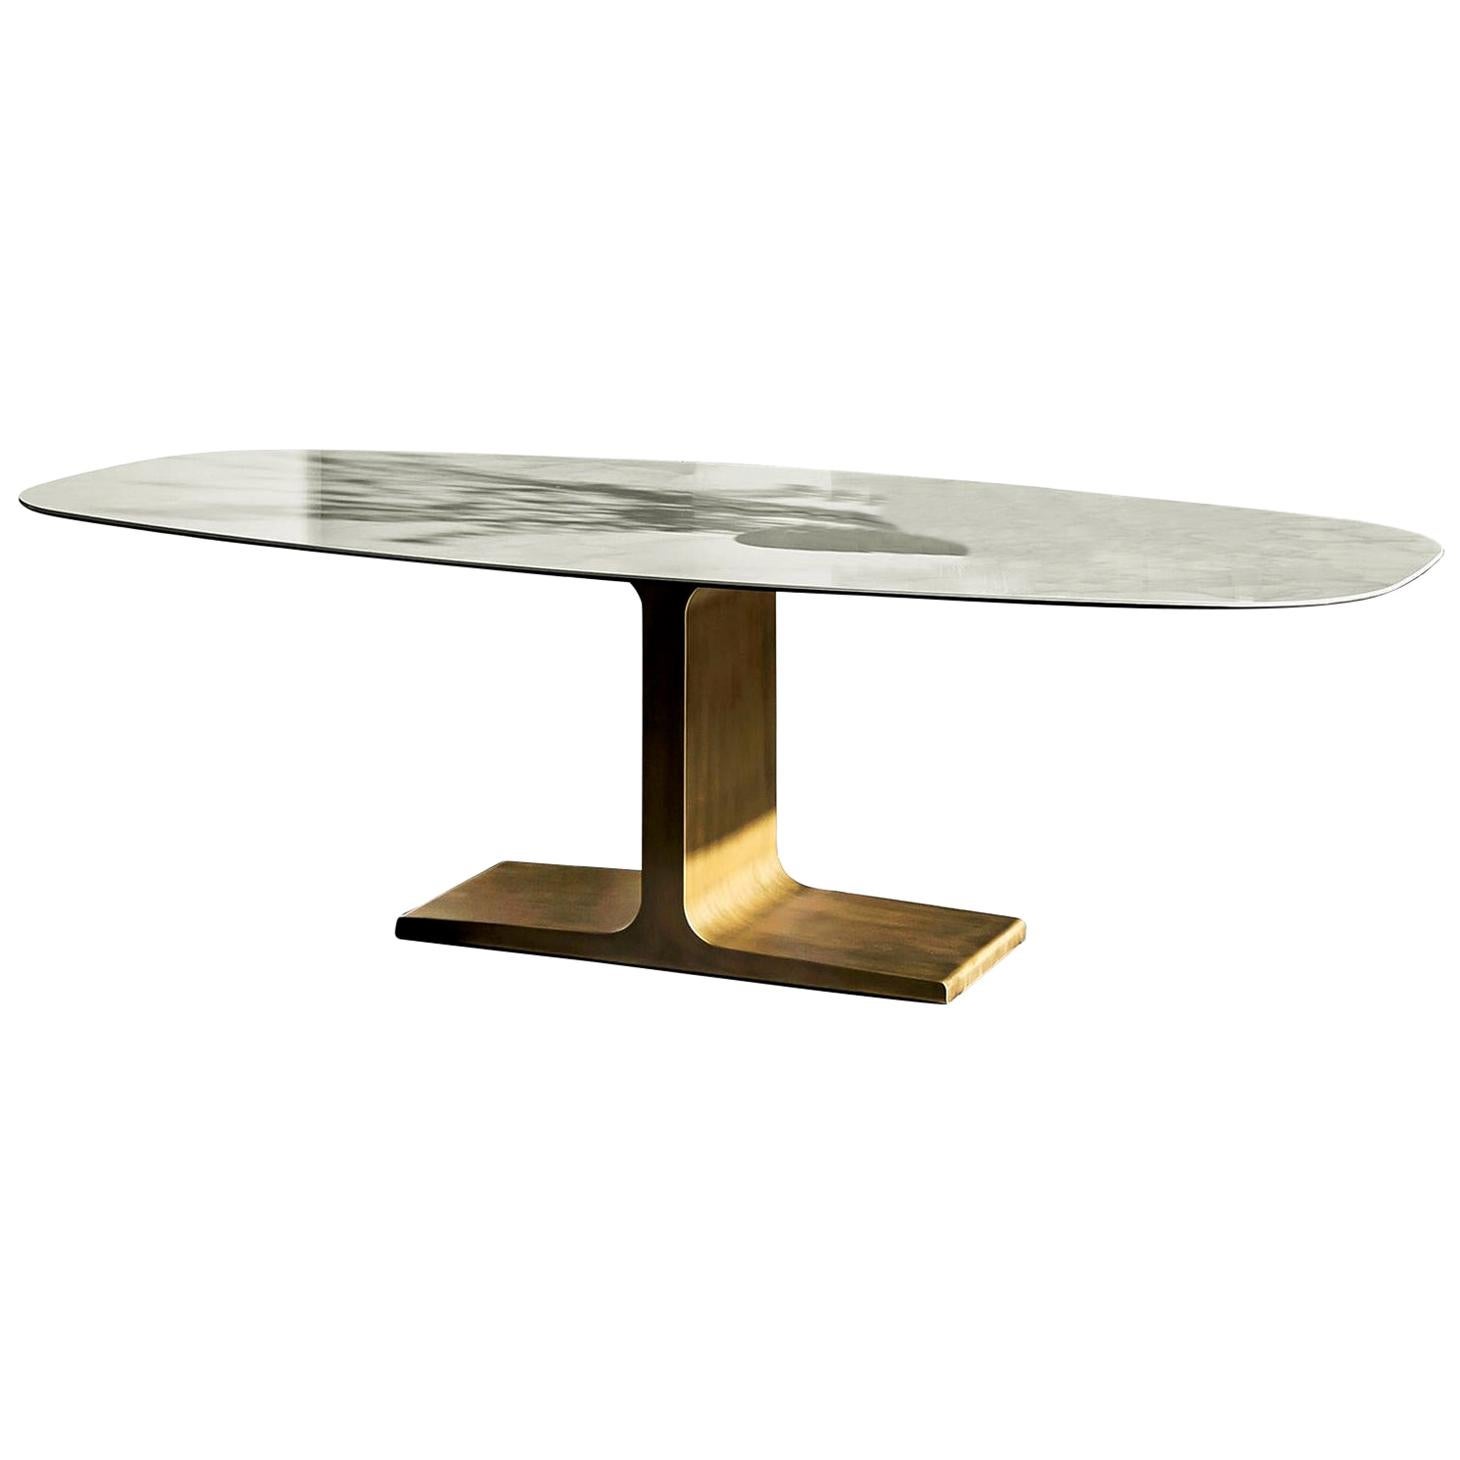 In Stock in Los Angeles, Brass and Ceramic Dining Table, Lievore Altherr Molina